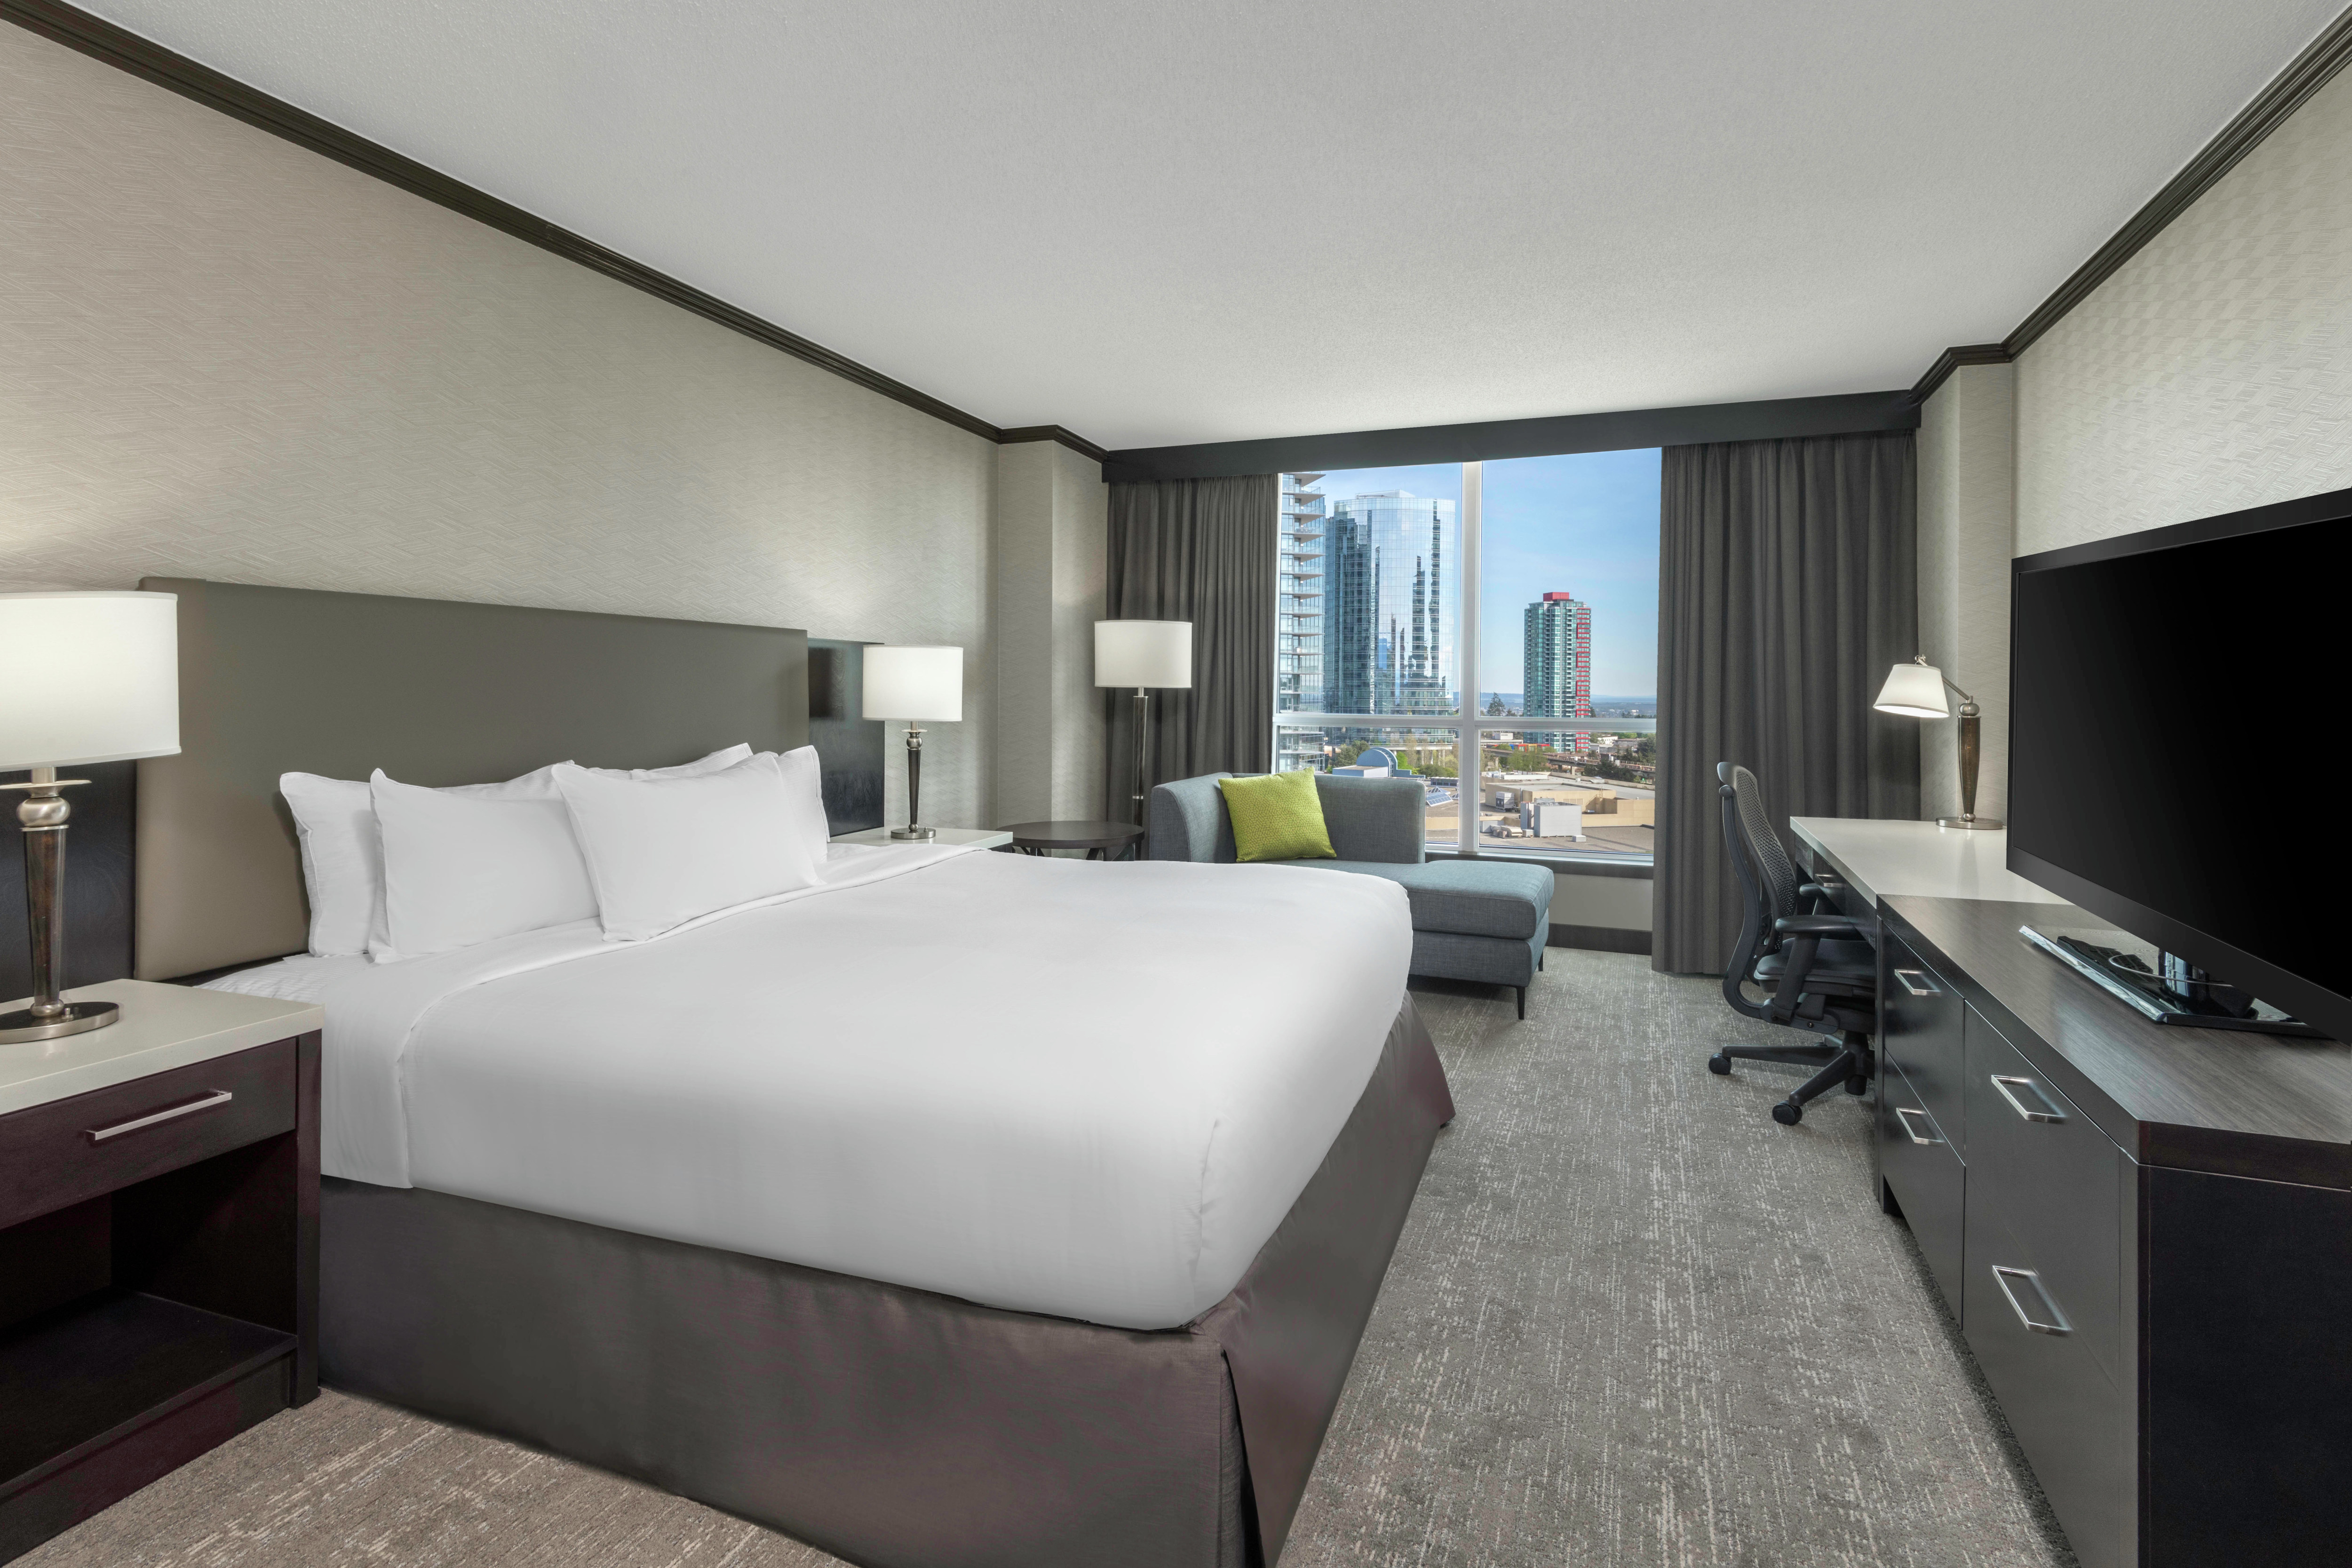  King-Sized Bed in Deluxe Room with City View